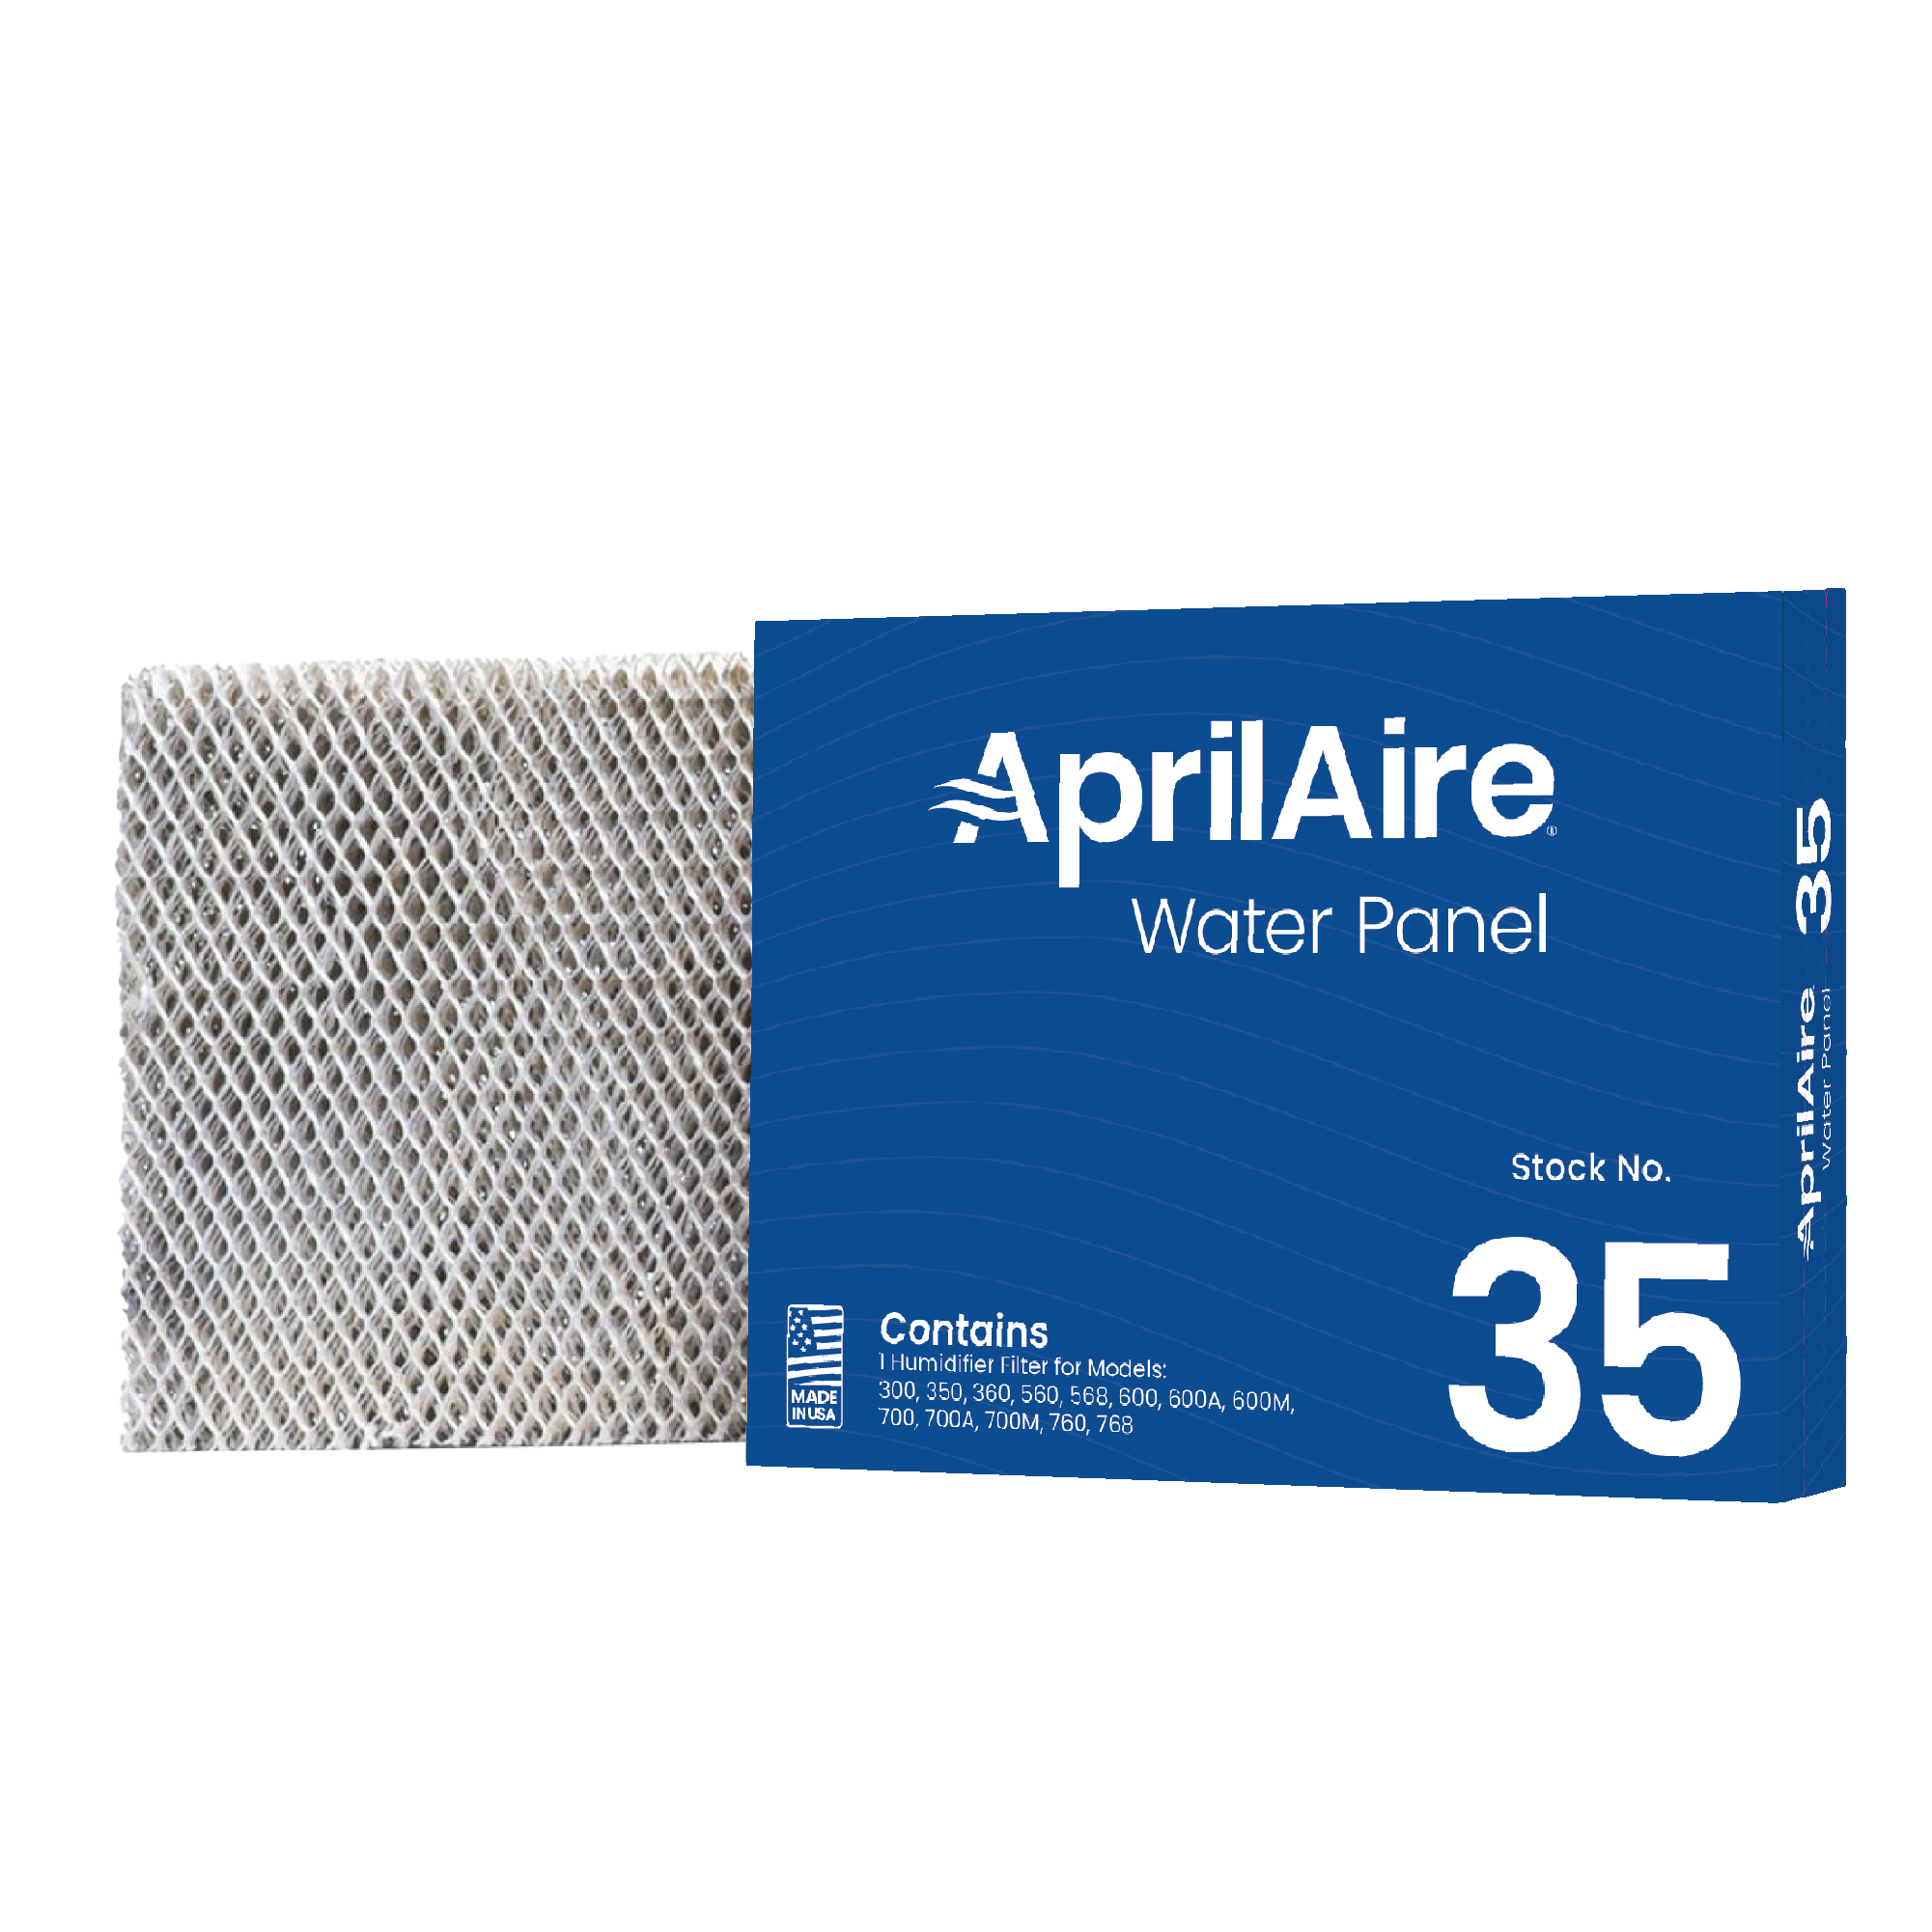 AprilAire Water Panel 35 Humidifier Filter Fits Whole House Humidifier Models 300, 350, 360, 560, 568, 600, 600A, 600M, 700, 700A, 700M, 760 and 768